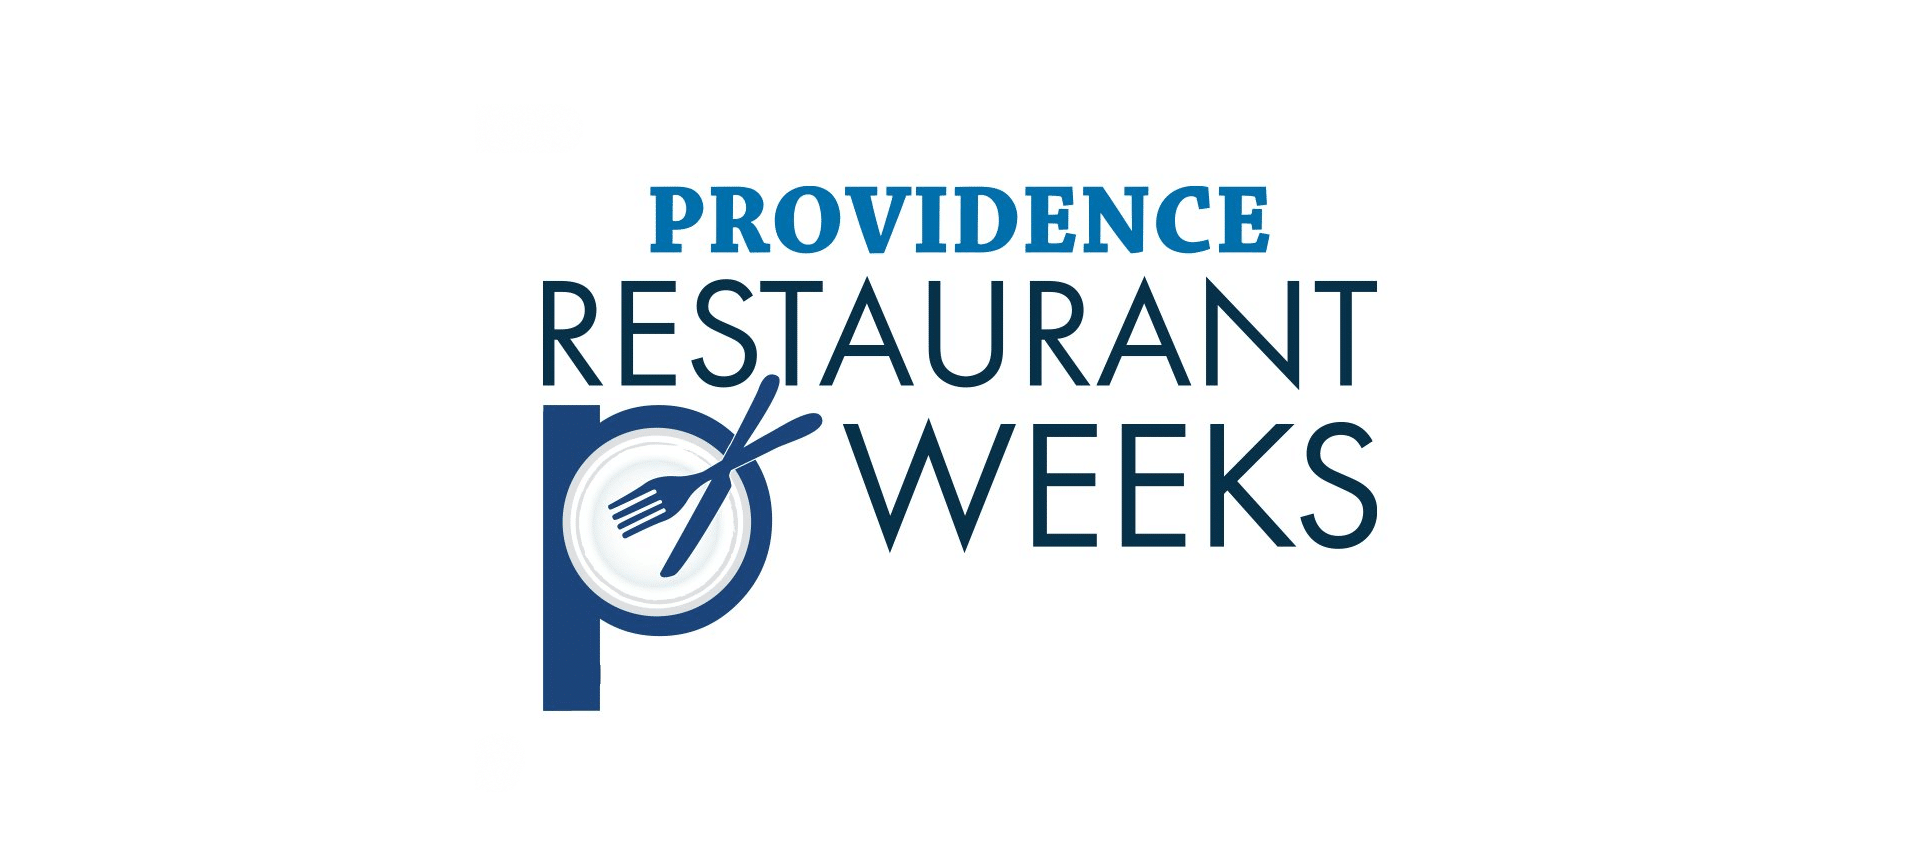 Blue text- Providence Restaurant Weeks with plate, fork, and spoon.